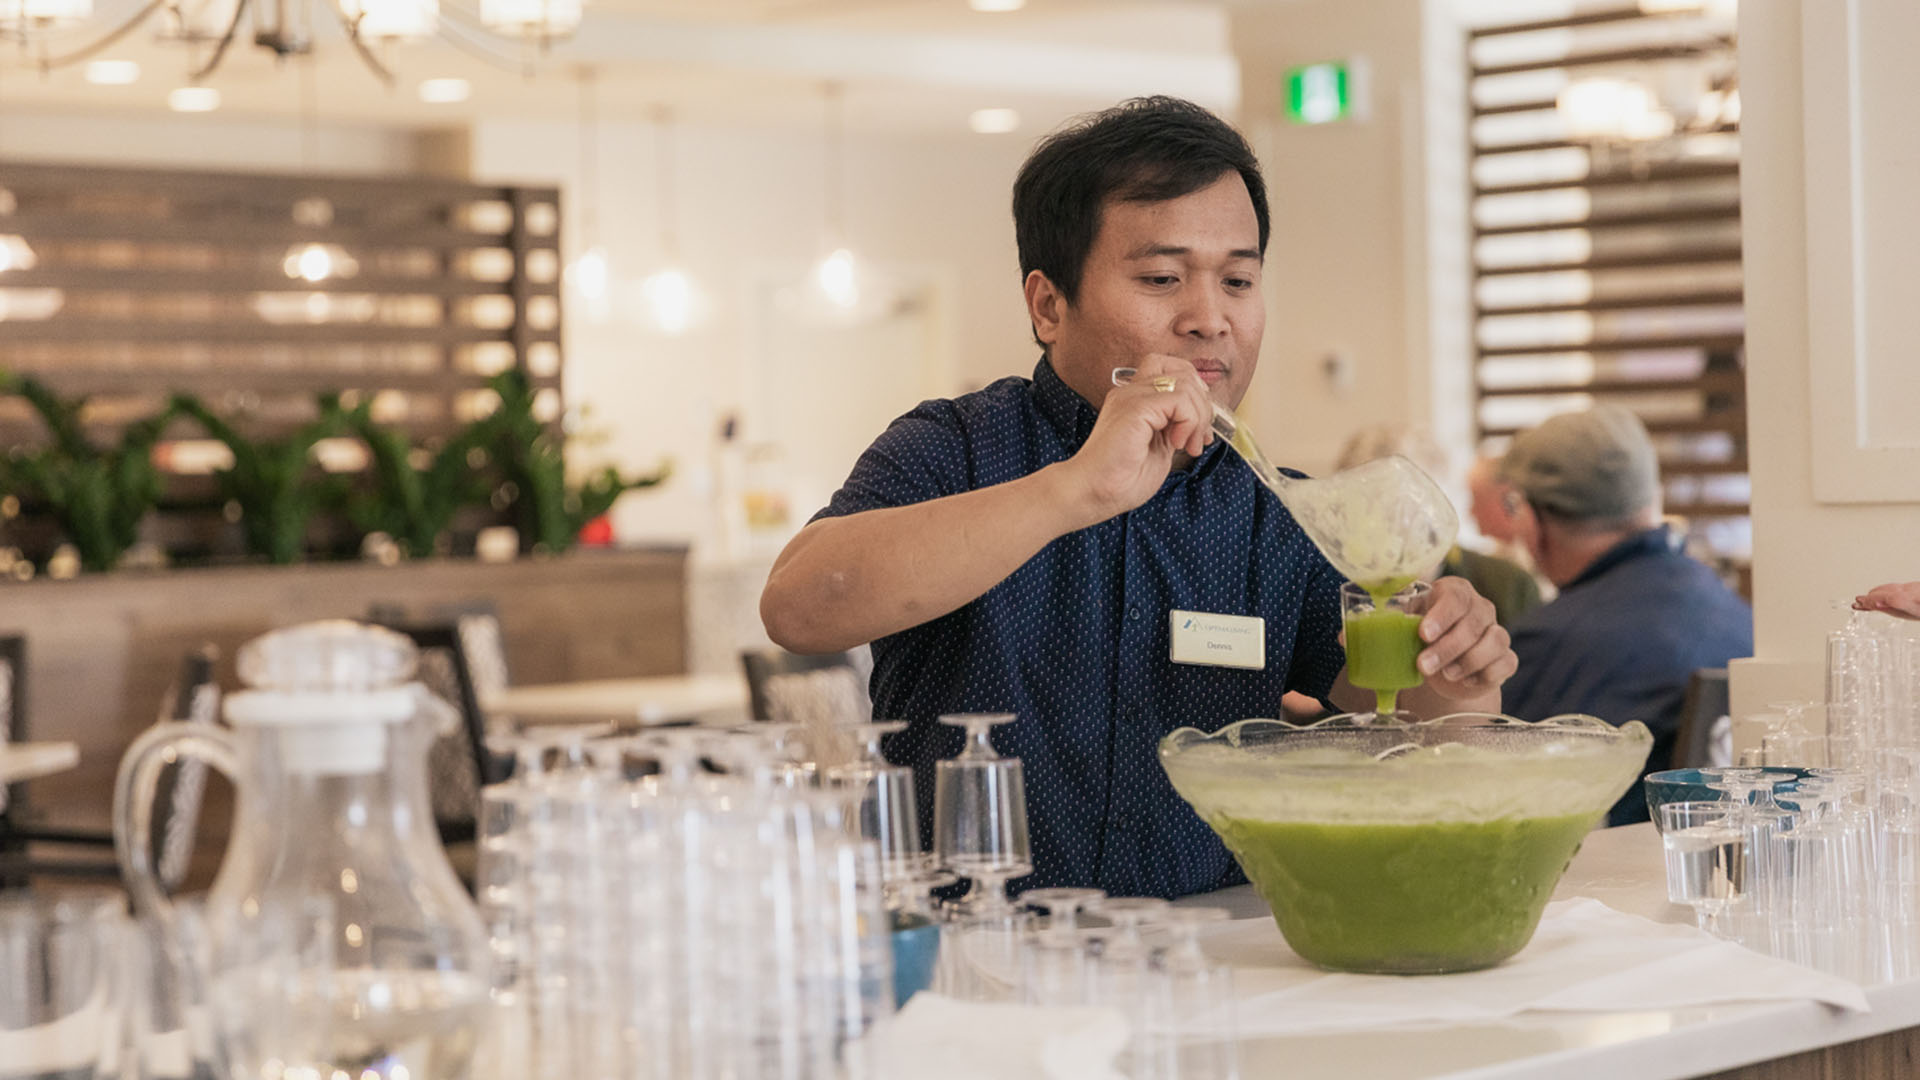 Optima Living staff member pouring a drink from a punch bowl